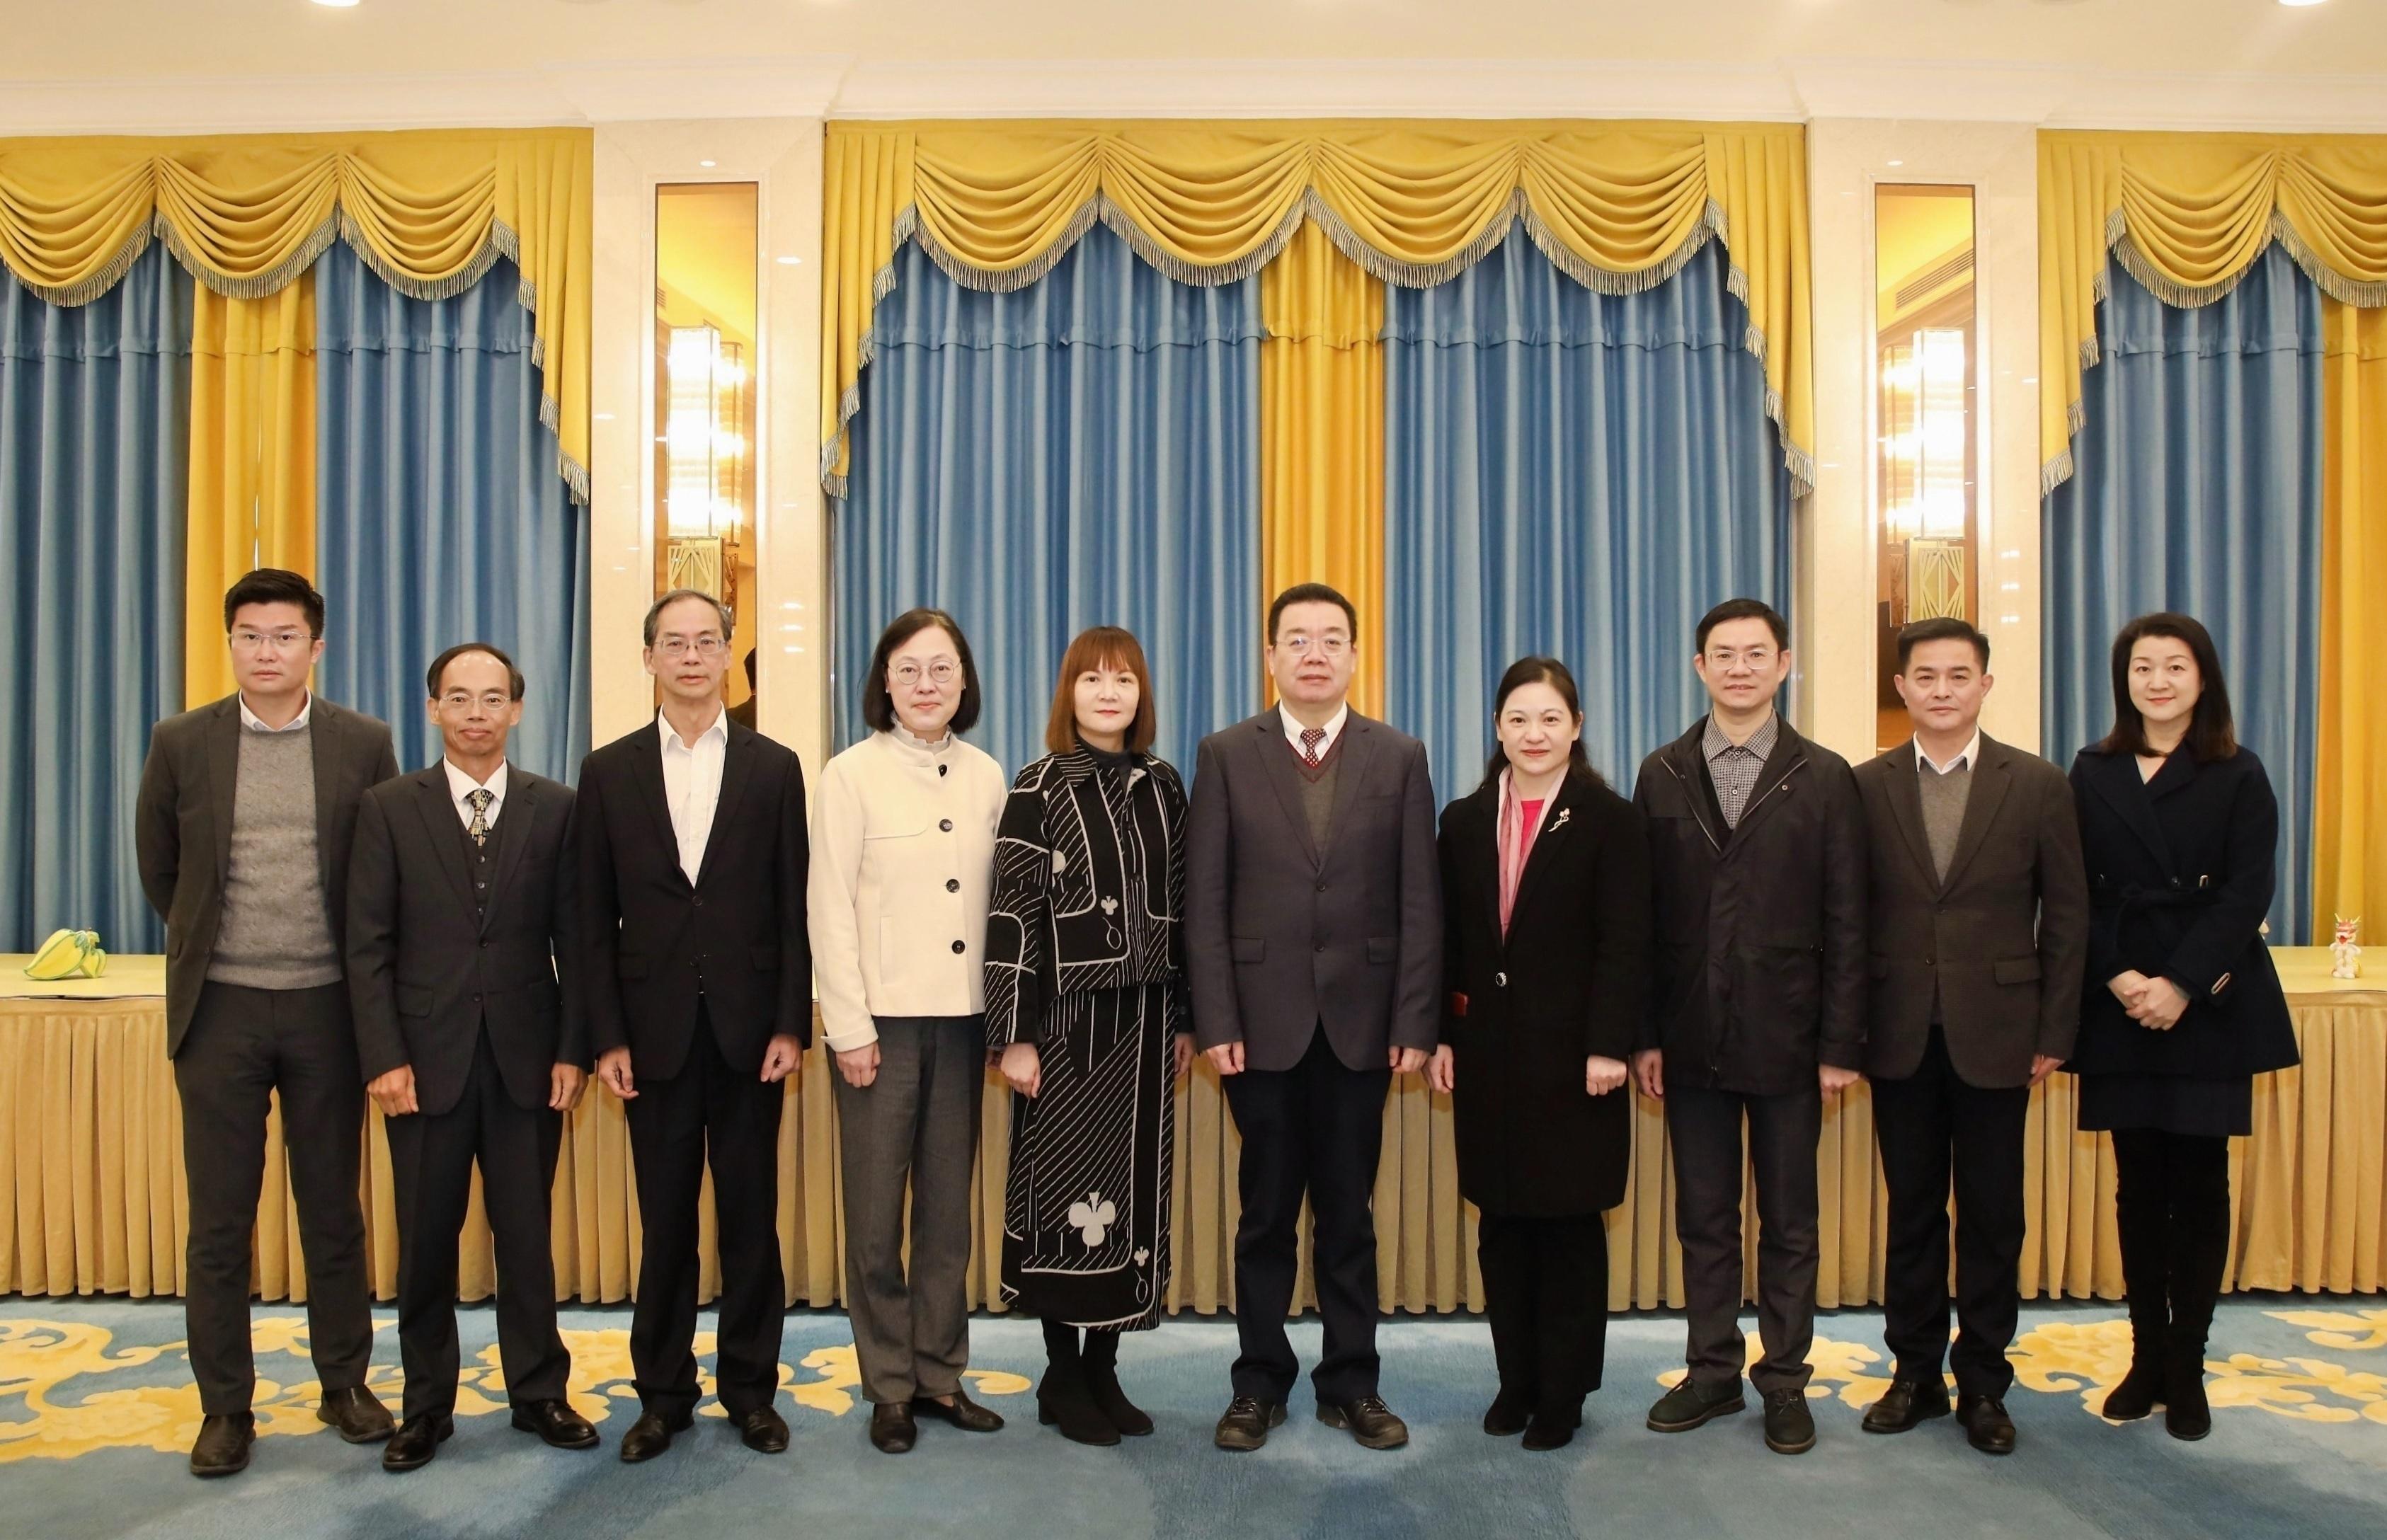 The Commissioner for the Development of the Guangdong-Hong Kong-Macao Greater Bay Area, Ms Maisie Chan, visited Foshan today (January 29). Photo shows Ms Chan (fifth left), Member of the Standing Committee of the Communist Party of China Foshan Municipal Committee and Vice Mayor of the Foshan Municipal Government, Mr Liu Jie (fifth right), and leaders of the Taiwan, Hong Kong and Macao Affairs Bureau and Office of Leading Group for the Development of Guangdong-Hong Kong-Macao Greater Bay Area of Foshan Municipality as well as members of the Hong Kong delegation.